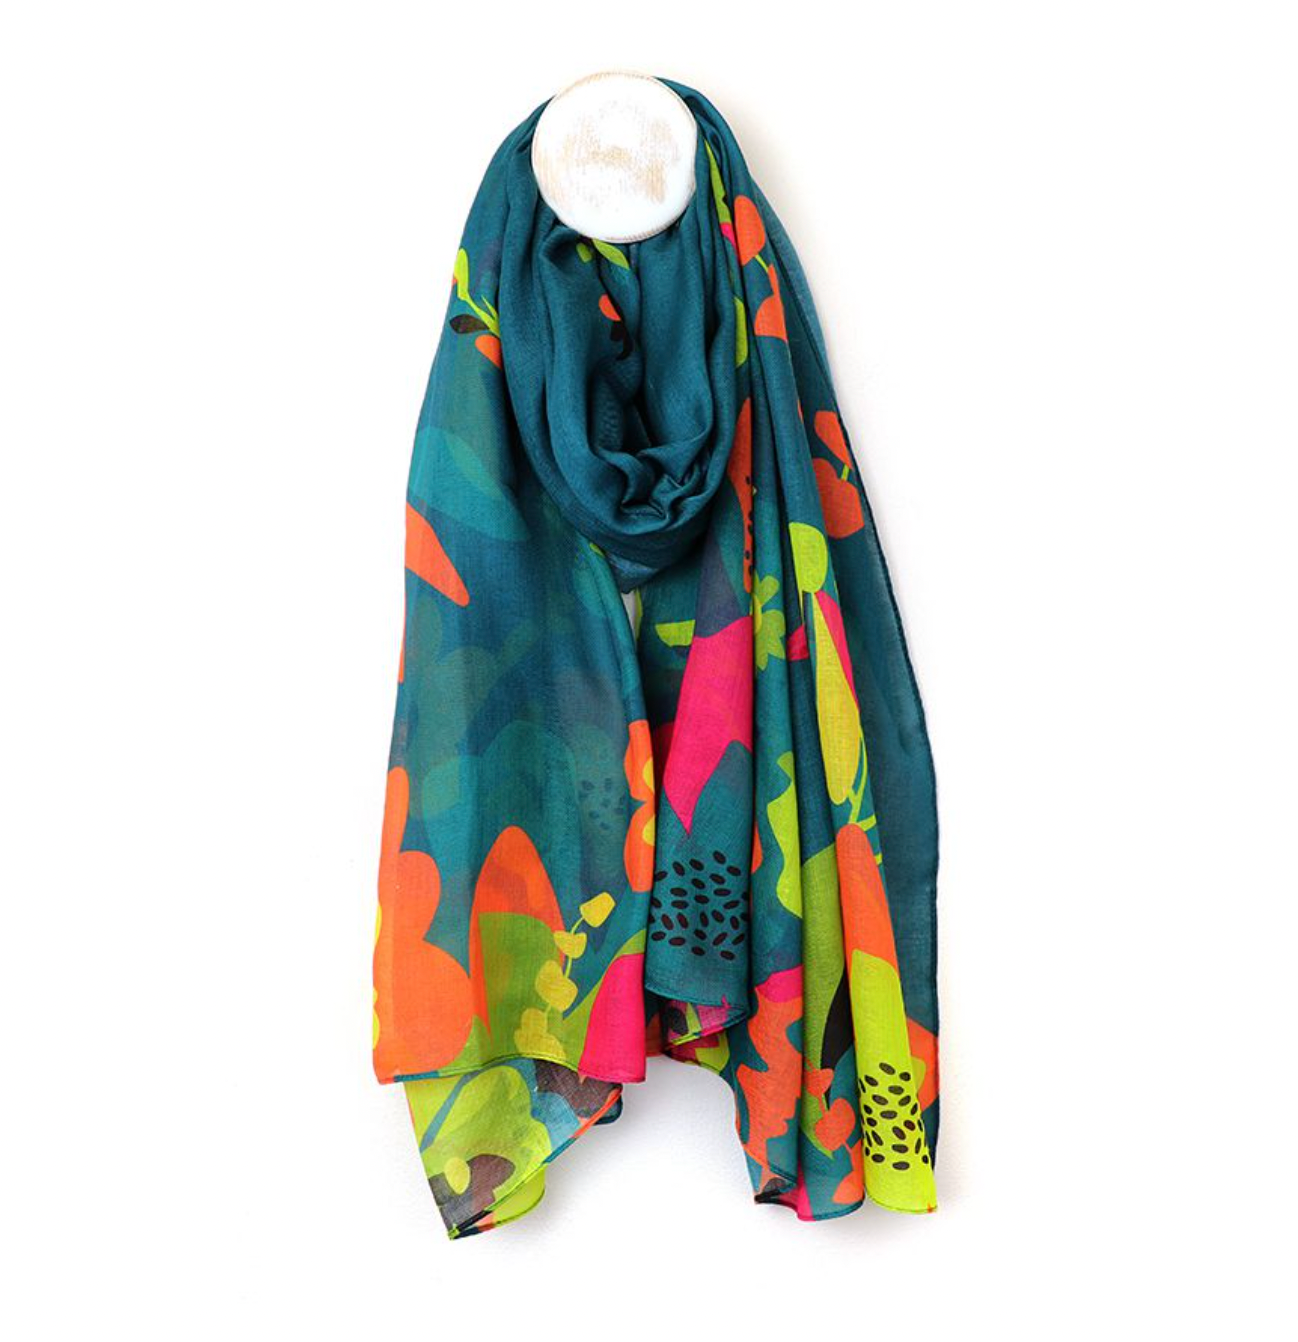 Teal and multi coloured tropical paradise print Repreve recycled material scarf